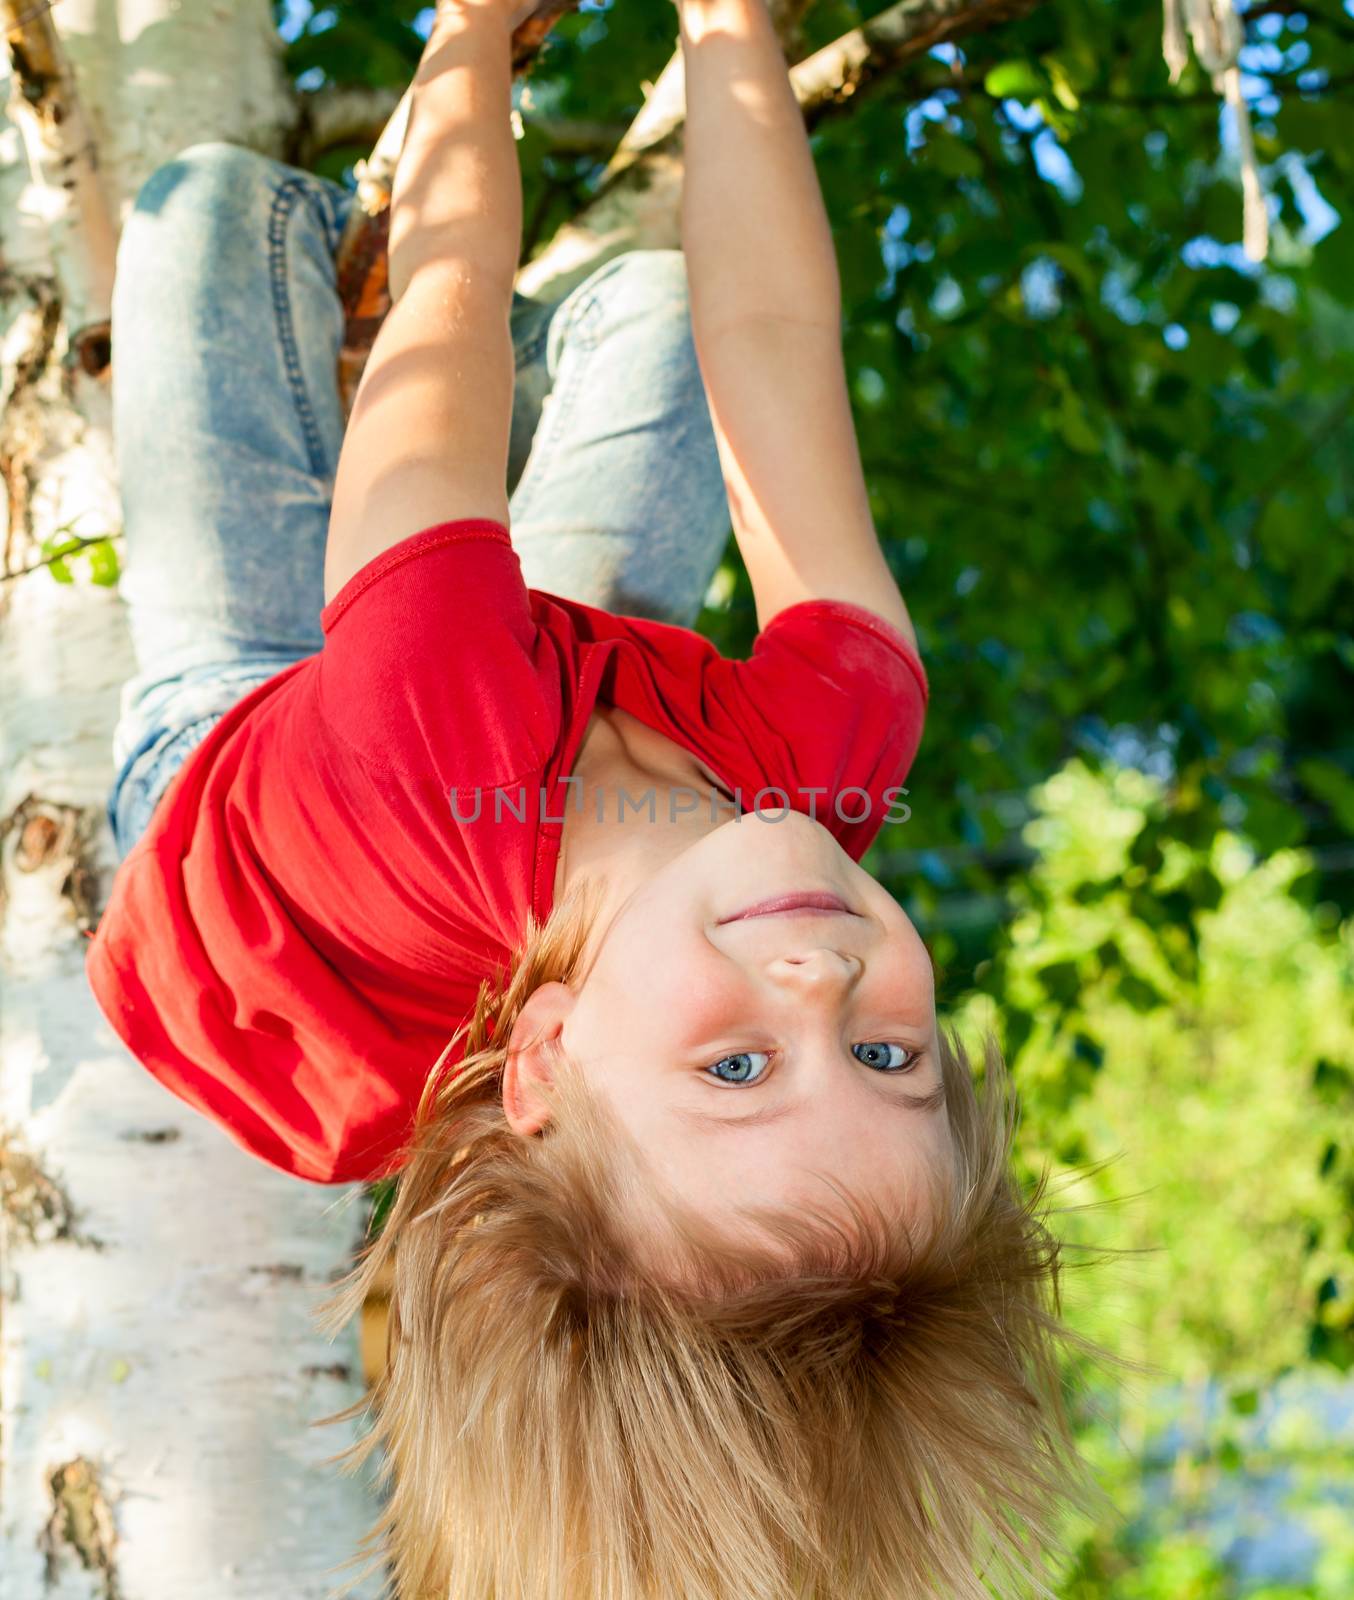 Child hanging from a tree branch by naumoid